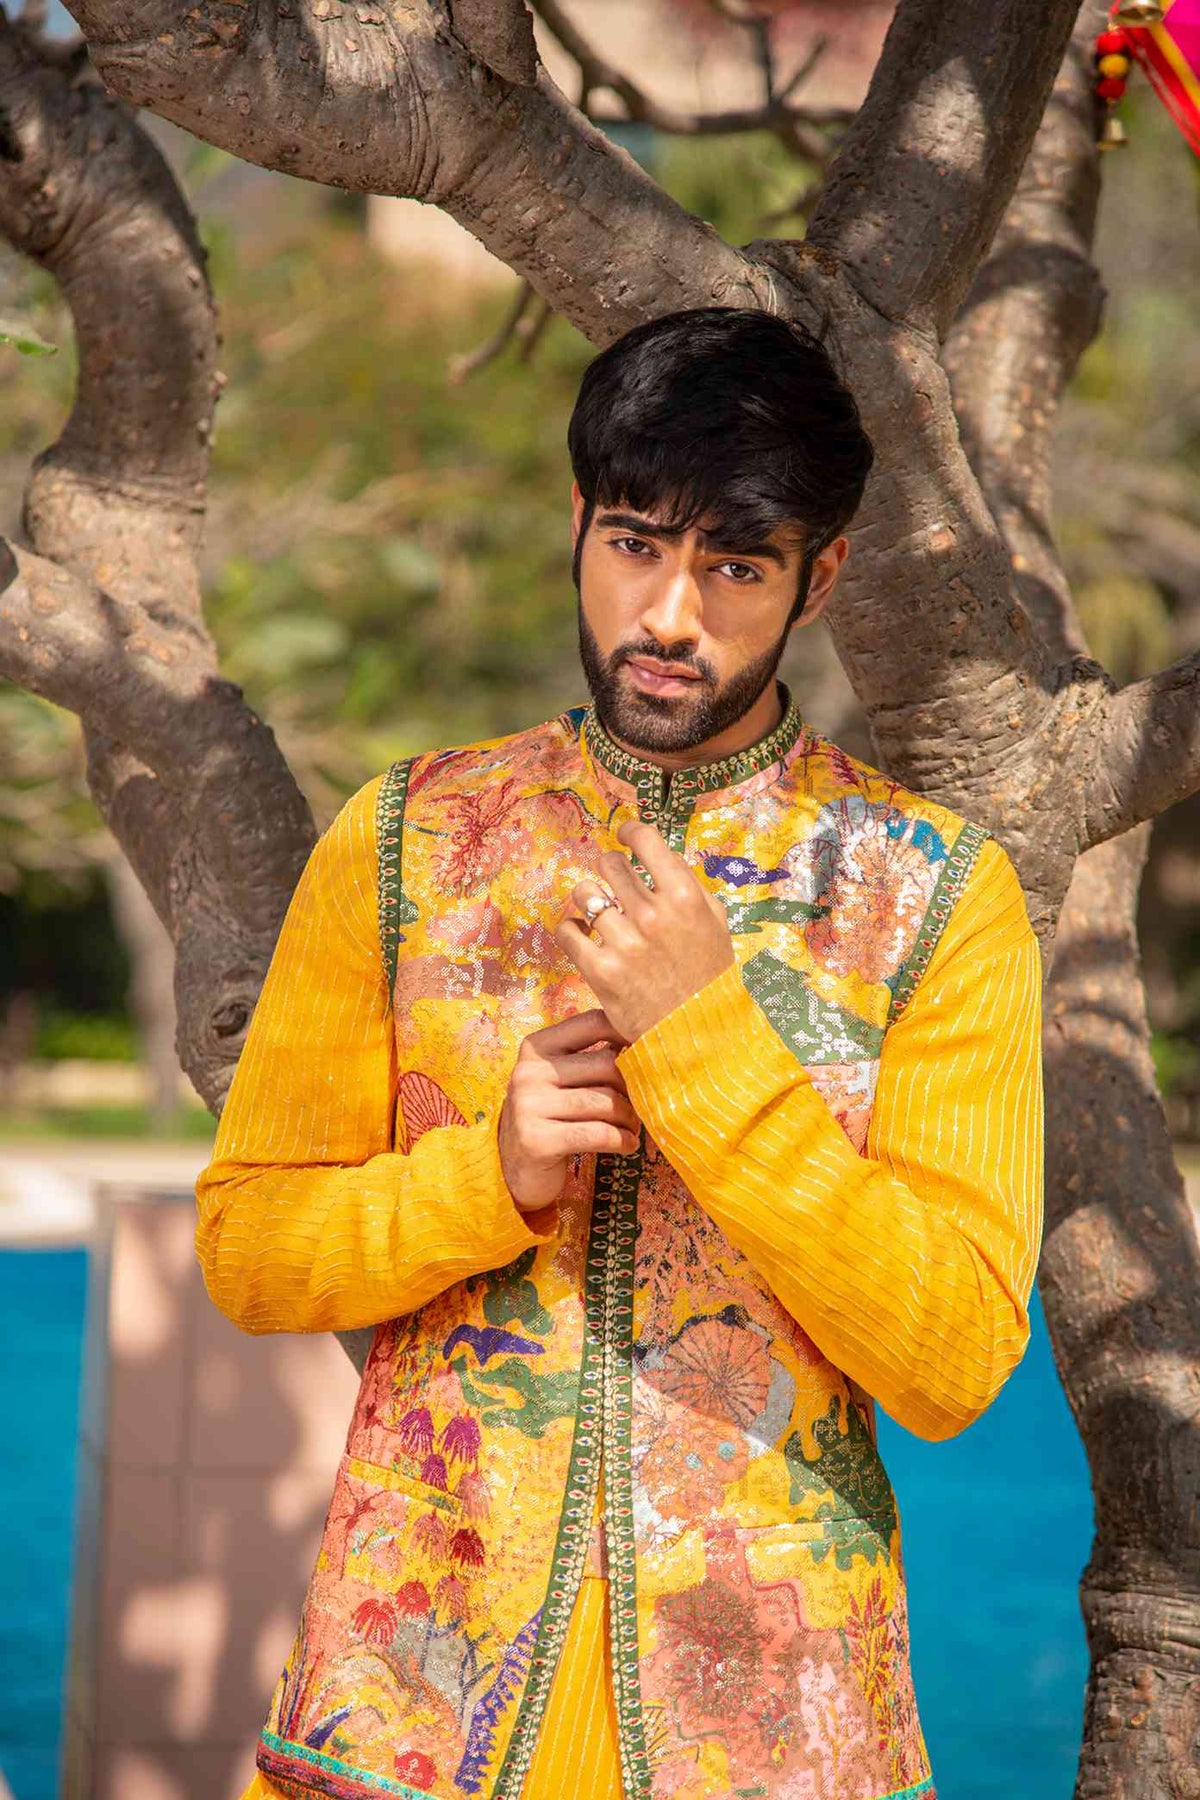 Printed Jacket In Handmade Fabric Matched With A Yellow Kurta In Georgette